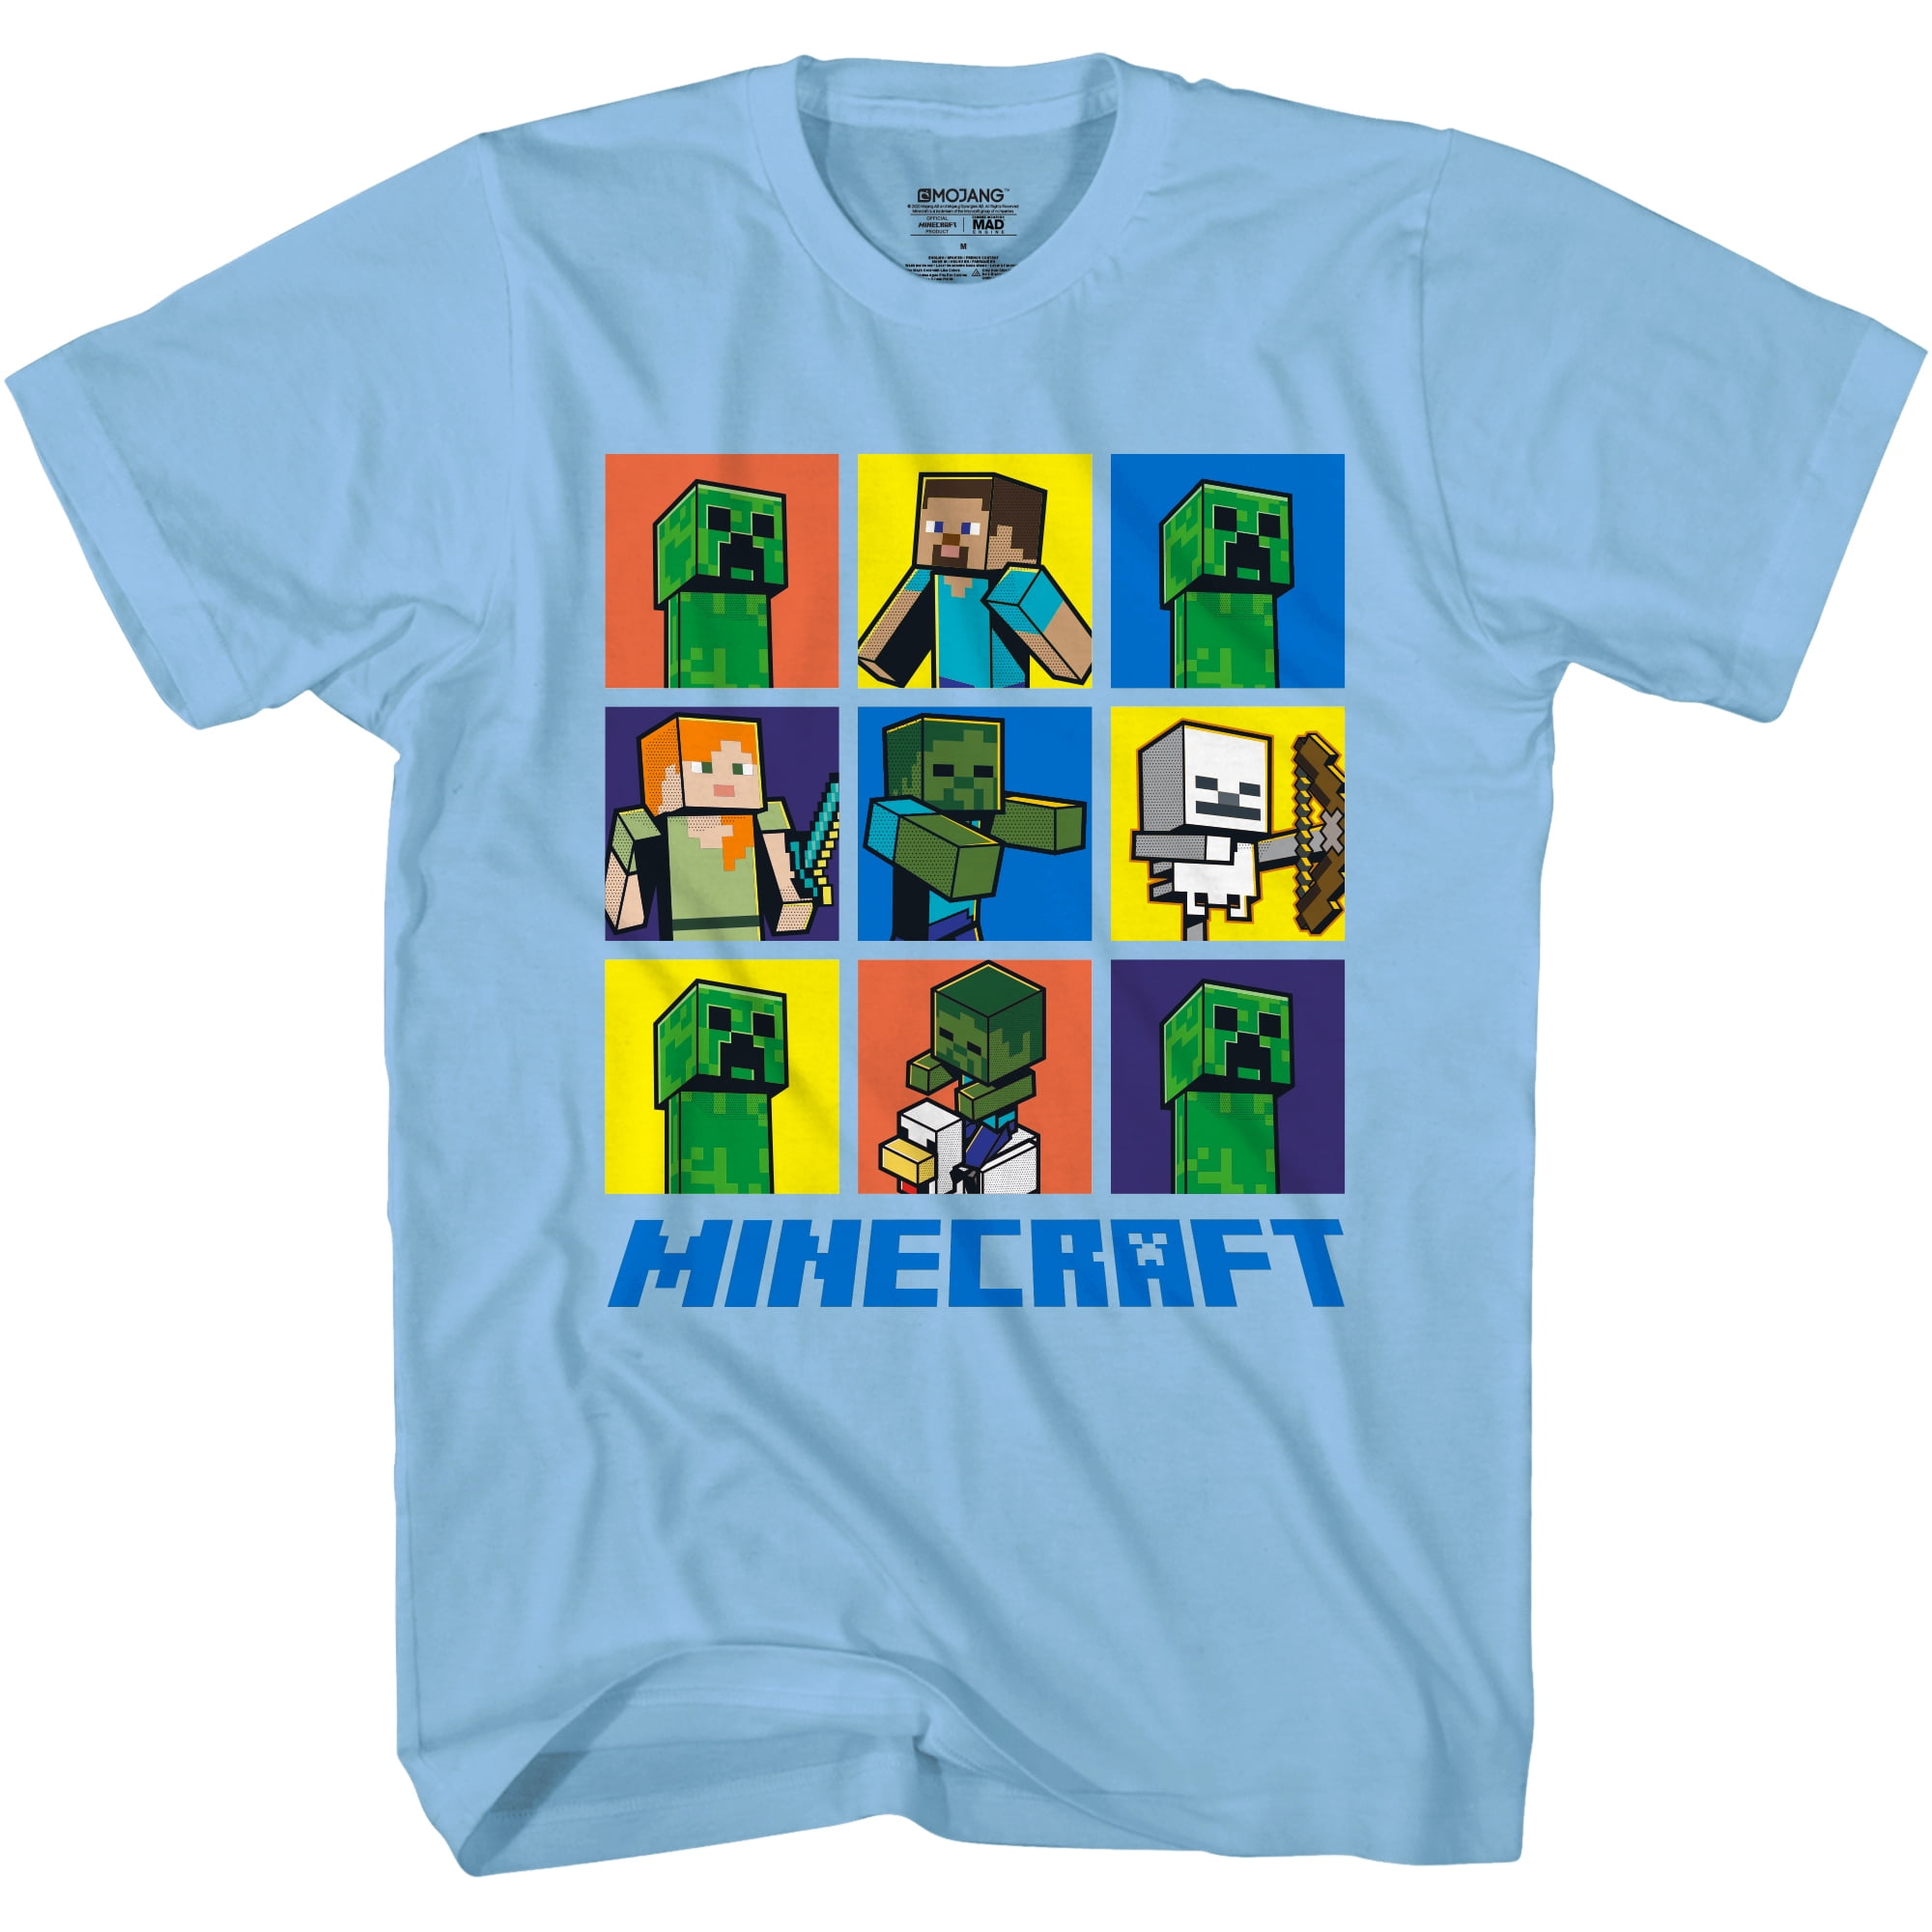 Minecraft Boys T-Shirt - Blue Character Boxes Shirt for Boys or Girls ...